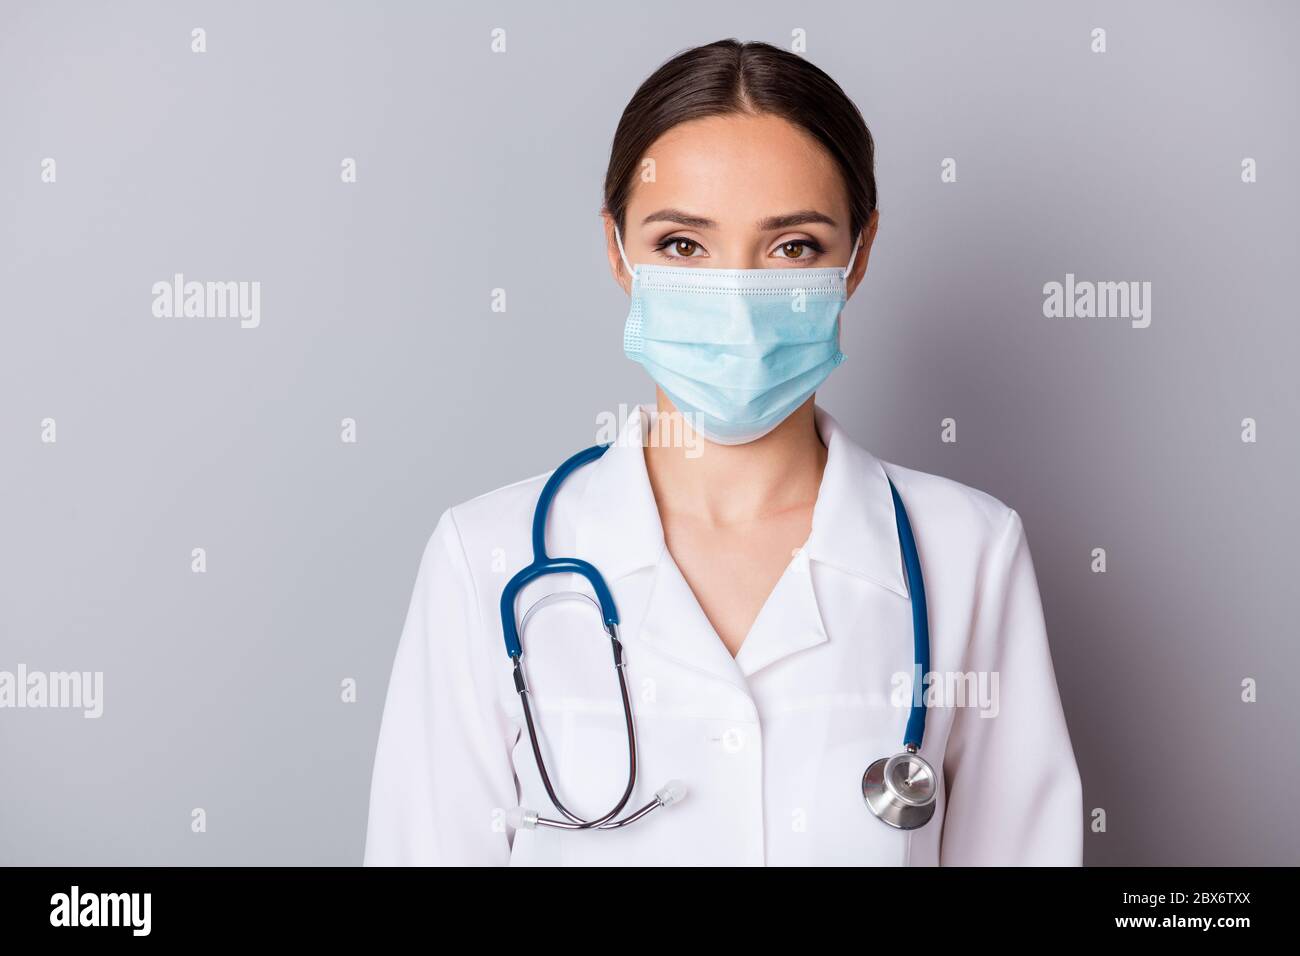 Closeup photo of attractive serious virologist doc lady experienced professional listen patient wear facial mask medical uniform lab coat stethoscope Stock Photo